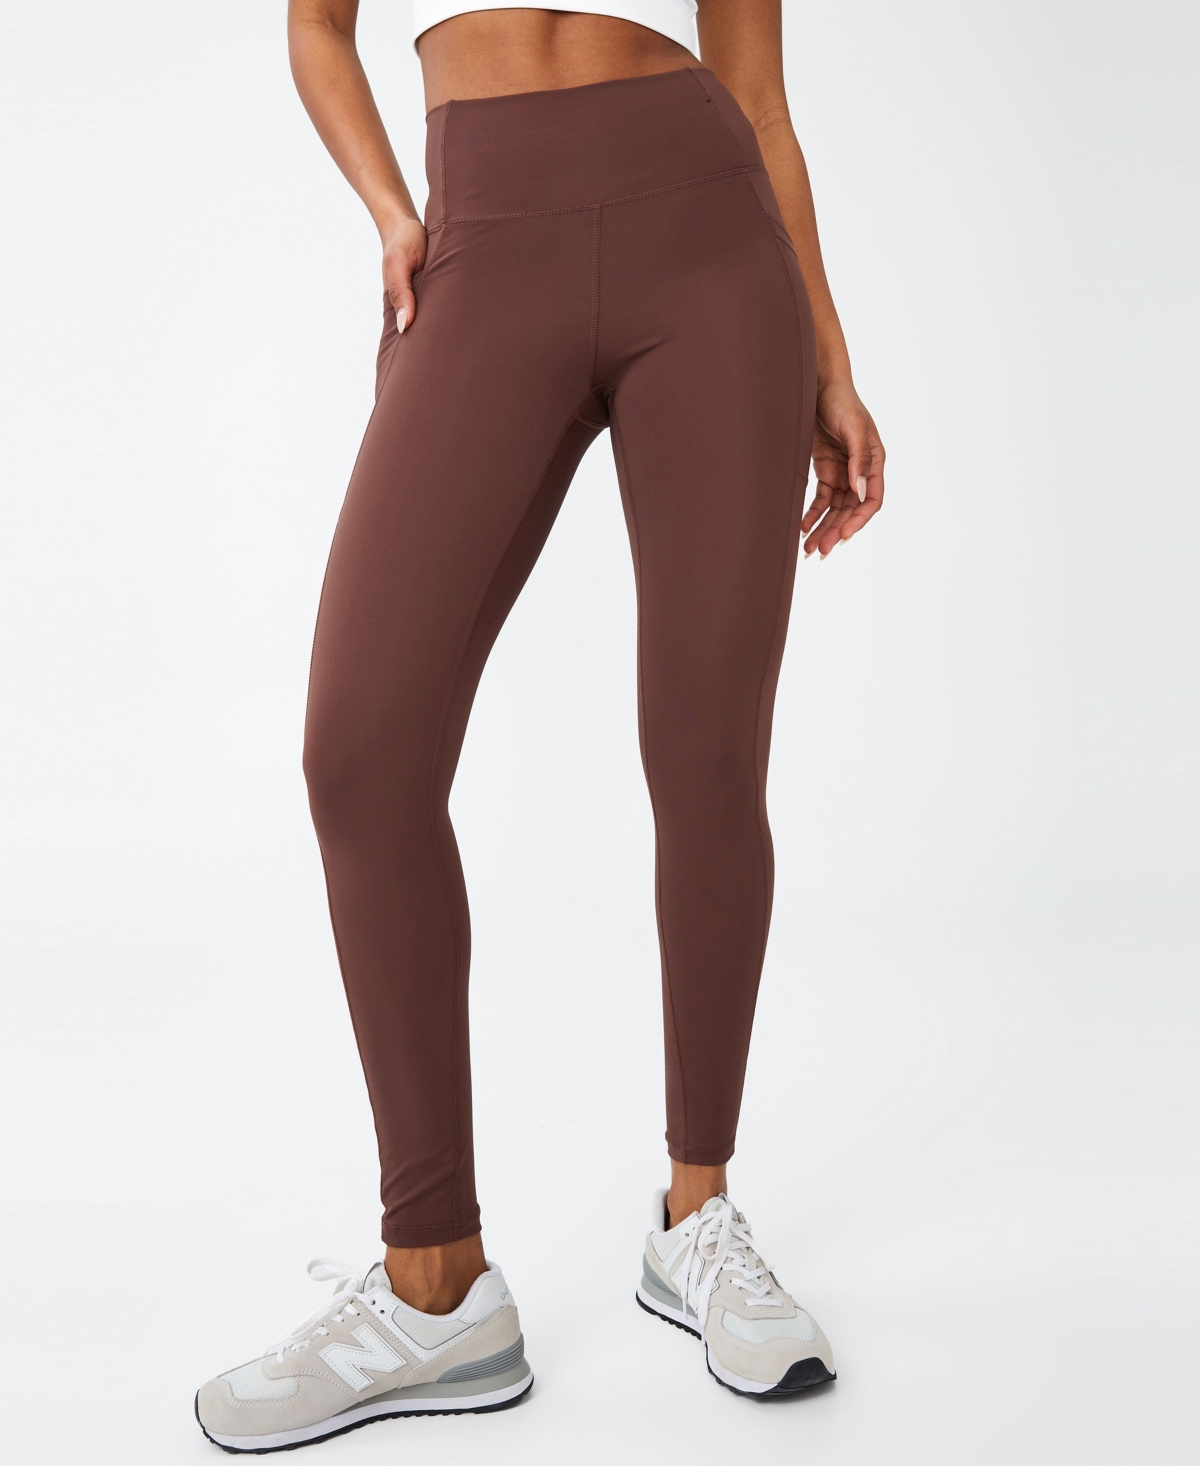 Cotton on Body Women's Ultimate Booty Pocket Full Length Tight Pants